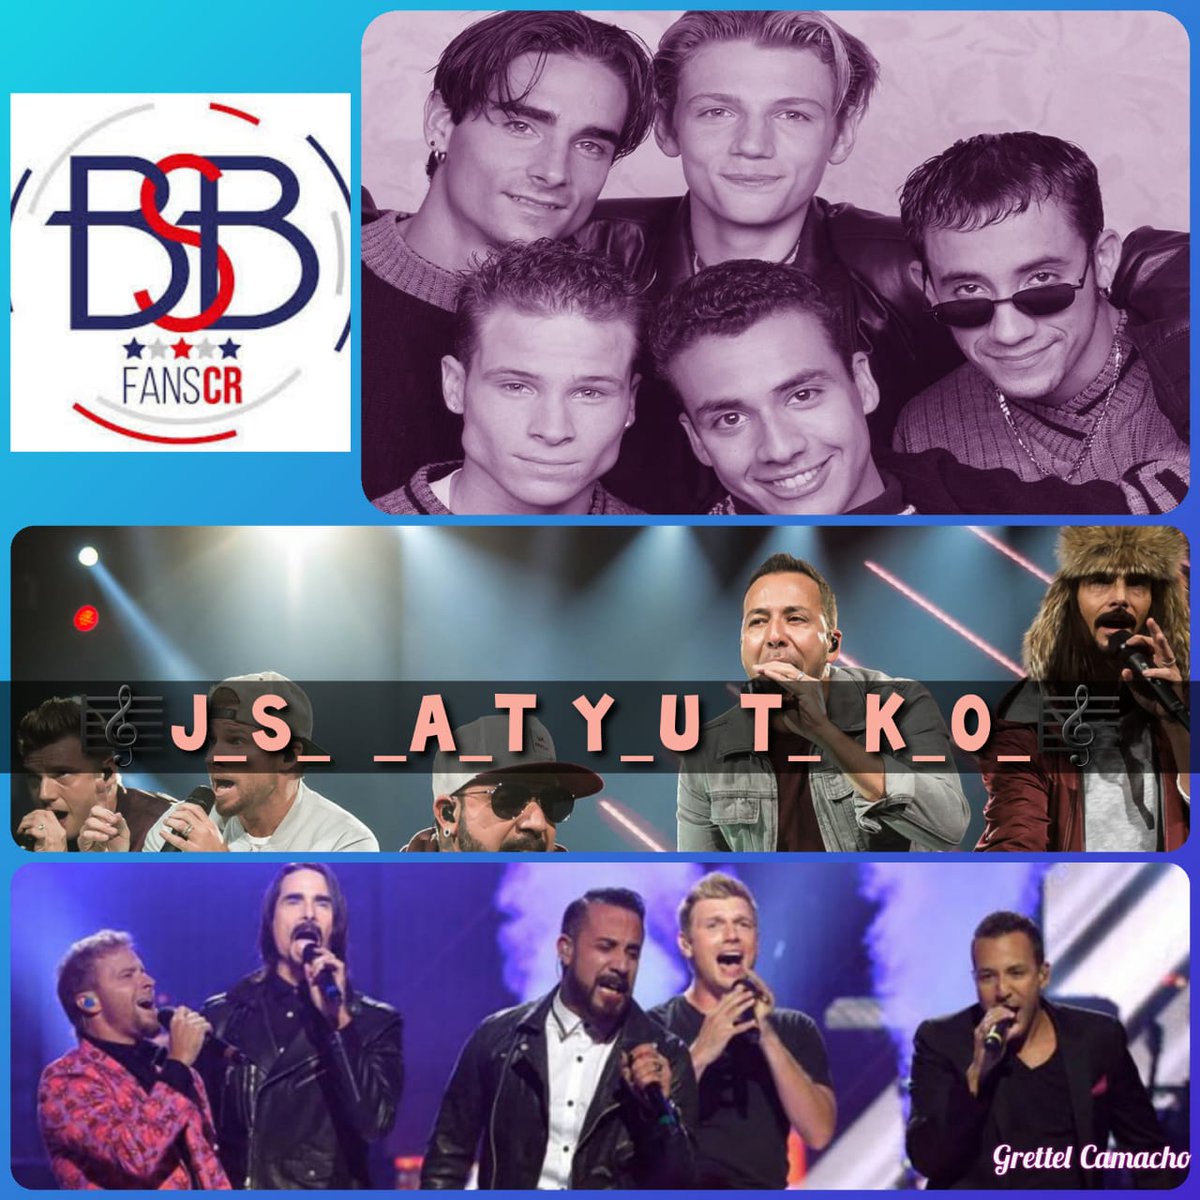 You know the name of all the BSB🎤 songs ... well guess what song it is.

Nite nite 😴😴😴

Creditos: Grettel Camacho

#bsbcrfans  @backstreetboys @kevinscottrichardson @rockpics @howied @nickcarter @aj_mclean